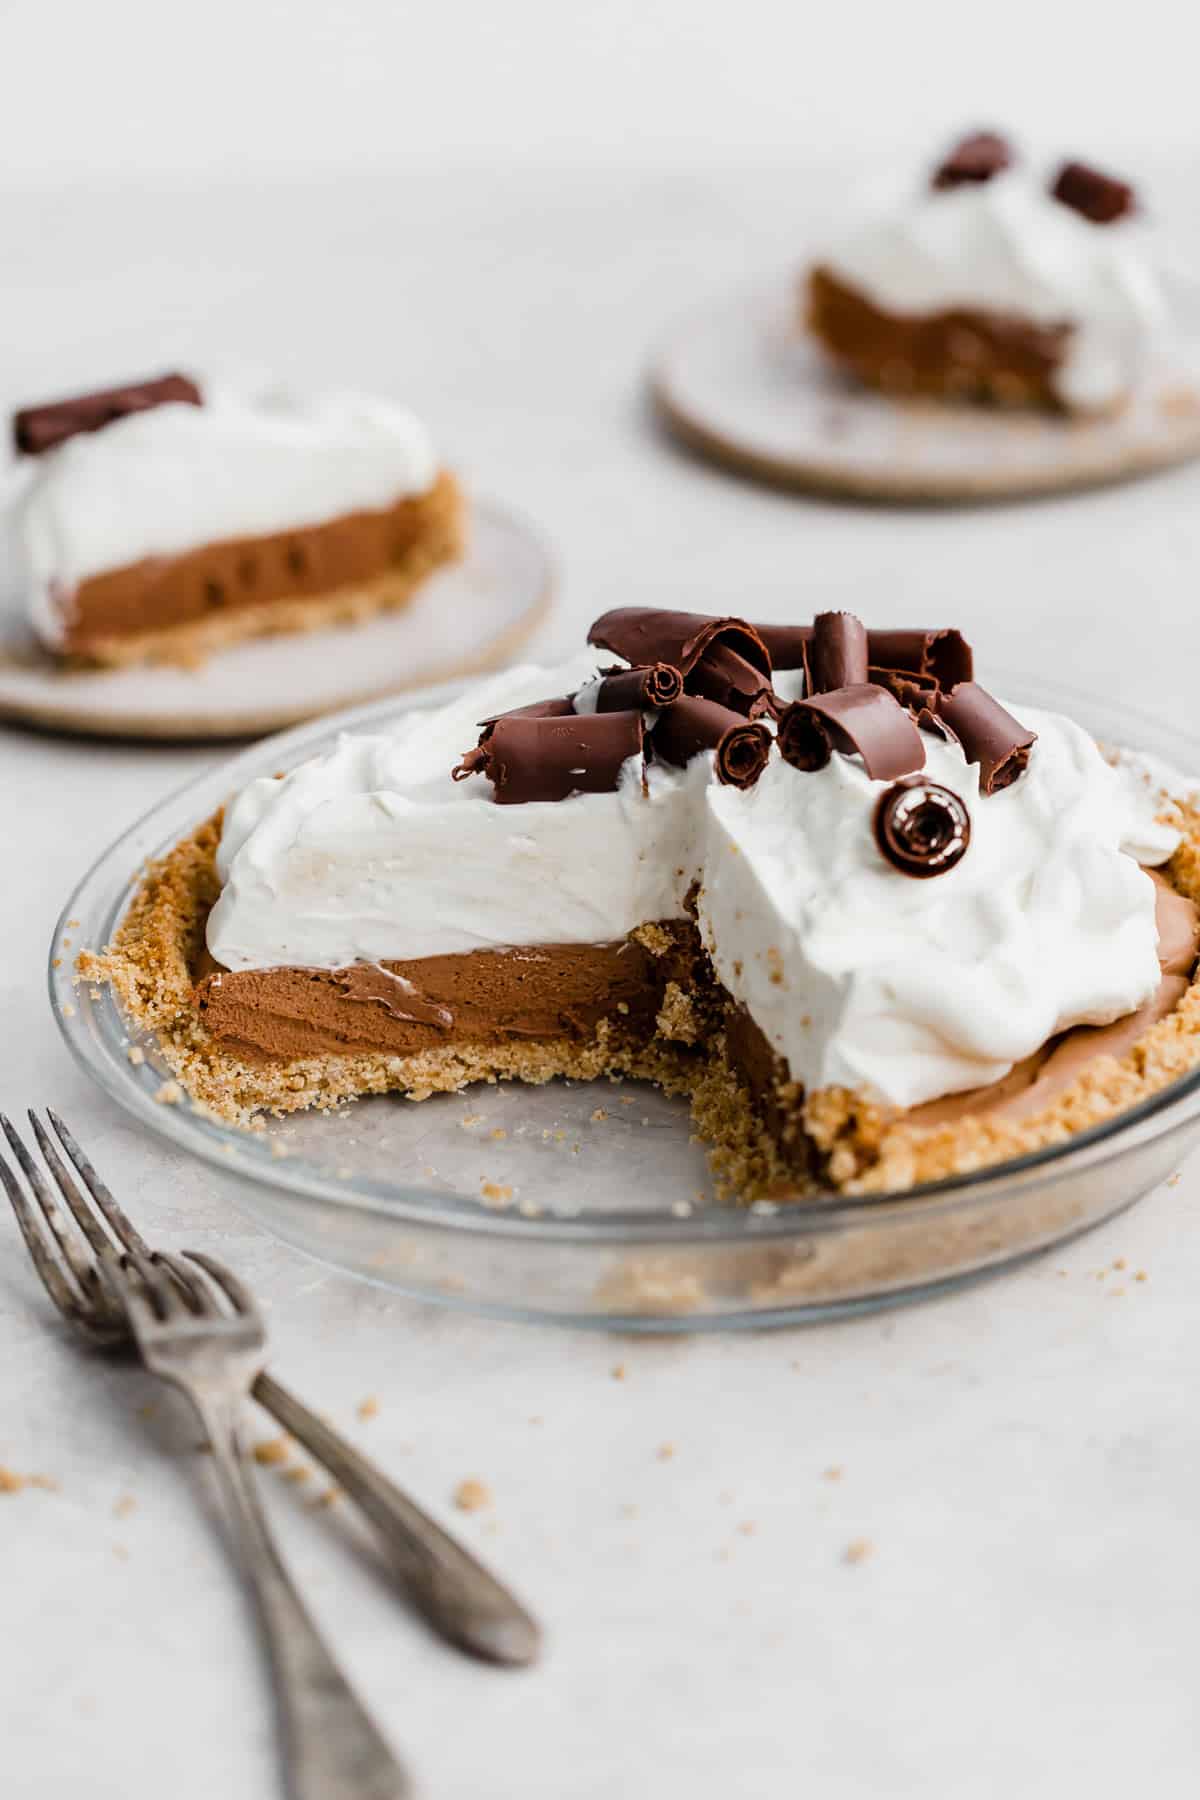 A French Silk Pie on graham cracker crust topped with whipped cream and large chocolate curls.